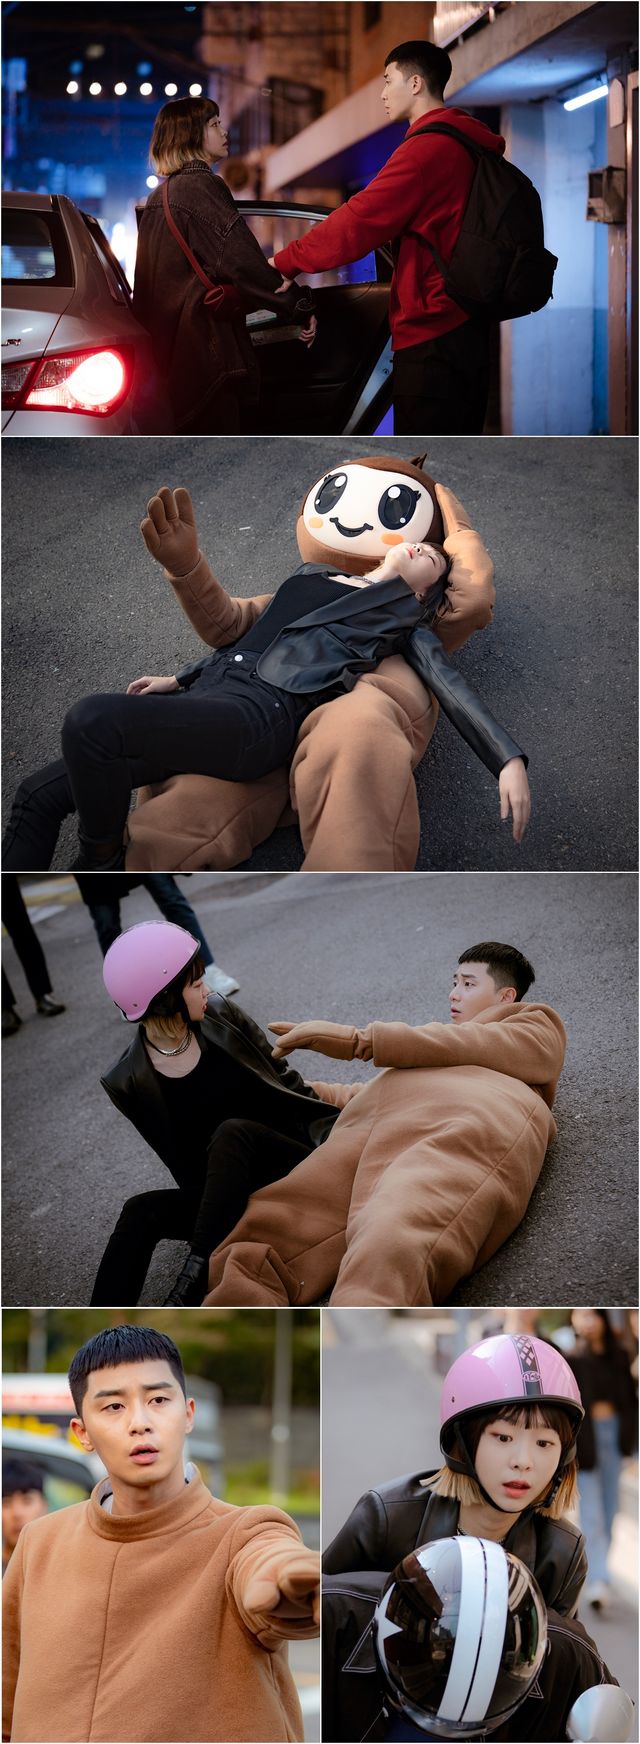 Itae One Clath Park Seo-joon and Kim Da-mi finally meet.On the 6th day before the broadcast three times, the first meeting of Park Seo-joon and Kim Da-mi, which can not be more intense, is stimulated by the curiosity of the gilt drama Itae One Clath (director Kim Sung-yoon, playwright Cho Kwang-jin, production showbox and writing, One next Web toon Itae One Clath).After a hot wait, Itae One Clath, which met with viewers, attracted viewers from the first broadcast, foreshadowing the hip rebellion of youths who were united by unreasonable world stubbornness and passenger.Above all, Park Seo-joons presence, which had returned to the same group of hot-blooded youthful Park Seo-joon, was overwhelming.In the last broadcast, the death of his father led to a link between Park and Jang Dae-hee (Yoo Jae-myeong), the president of Jangga, which is a terrible link that can not be broken.Roy, who was released with a boiling heart in the word revenge, revealed his dream of setting up a small store in Itae One.Seven years later, Roy, who entered Itae One to achieve his dream, reunited with Oh Su-ah (Kwon Na-ra), amplifying his expectations.Another person who will change the fate of Roy, Kim Da-mi, is about to make a full-scale start.The photo shows the first meeting between Roy and Joy, and Joy, who is about to get into a taxi, and Roy, who snatched his wrist, foresaw an unusual first meeting.The appearance of Joy, who stimulated the just Xiao Xinnam Park, is already expected.Another photo released together attracts attention from two people who have been reunited on the streets of Itae, and Joy, who is divided into two bodies as if he passed out over a person wearing a doll mask, attracts attention.The main character in the doll is Roy, Xiao Xin, and the extraordinary personality of the influencer Joy, who adds to the expectation of what synergy they will receive.Especially, Kim Da-mi, who made a topic by decorating the first scene of Drama, is focused on his performance.In the third episode, which will be broadcast on the 7th (Friday), Itae Ones Sanbam pocha, which is filled with the blood and sweat of Park, will finally open.Here, the meeting between Joy Seo and Jang Geun-soo (Kim Dong-hee), the second son of Jangga, is expected to bring a stir to Sanbam.The first meeting between Roy and Joy is exciting from the beginning, said the production team of One Clath.I will be able to feel the unique charm of Joy at once, he said. Please watch the beginning of the hot rebellion, the arrival of the one-day,On the other hand, Itae One Clath will be broadcast at 10:50 pm on the 7th (Friday).(News operations team)Broadcast: February 7 (Fri) 10:50 p.m.